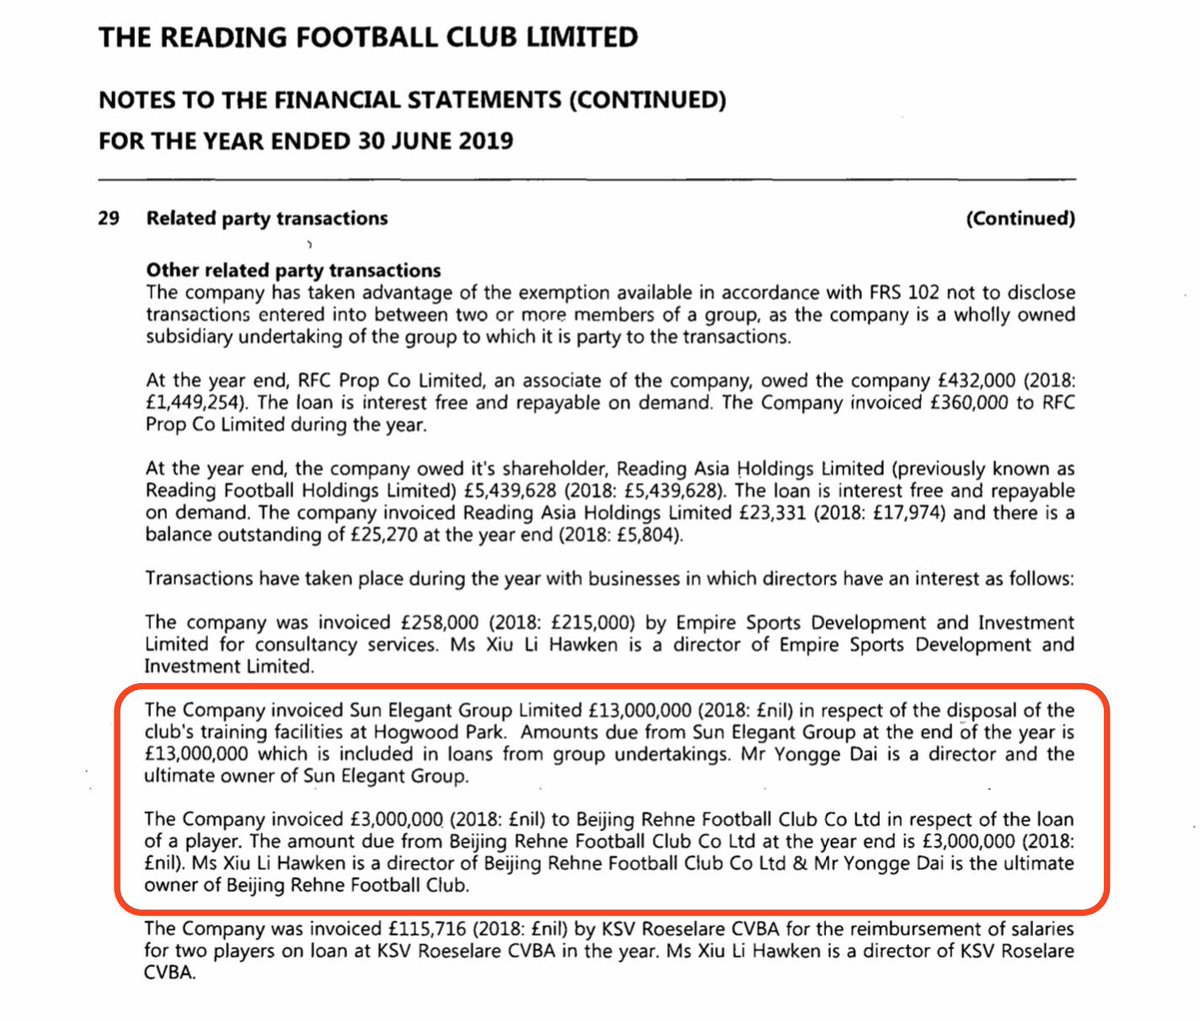 Reading had many transactions with companies owned by club owners in 2018/19